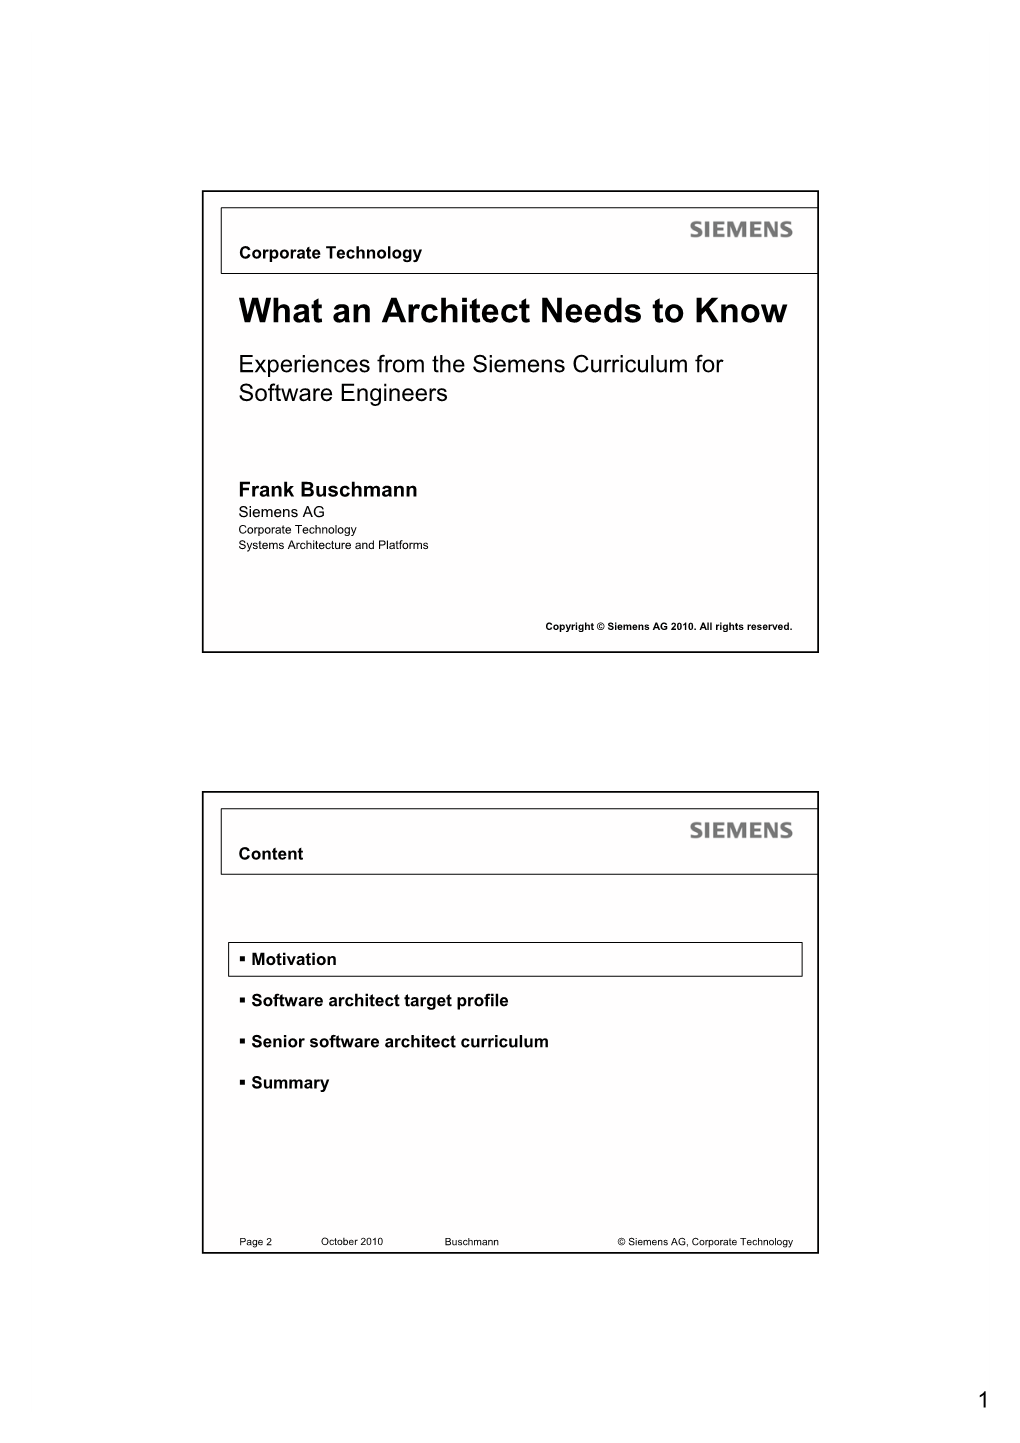 What an Architect Needs to Know Experiences from the Siemens Curriculum for Software Engineers